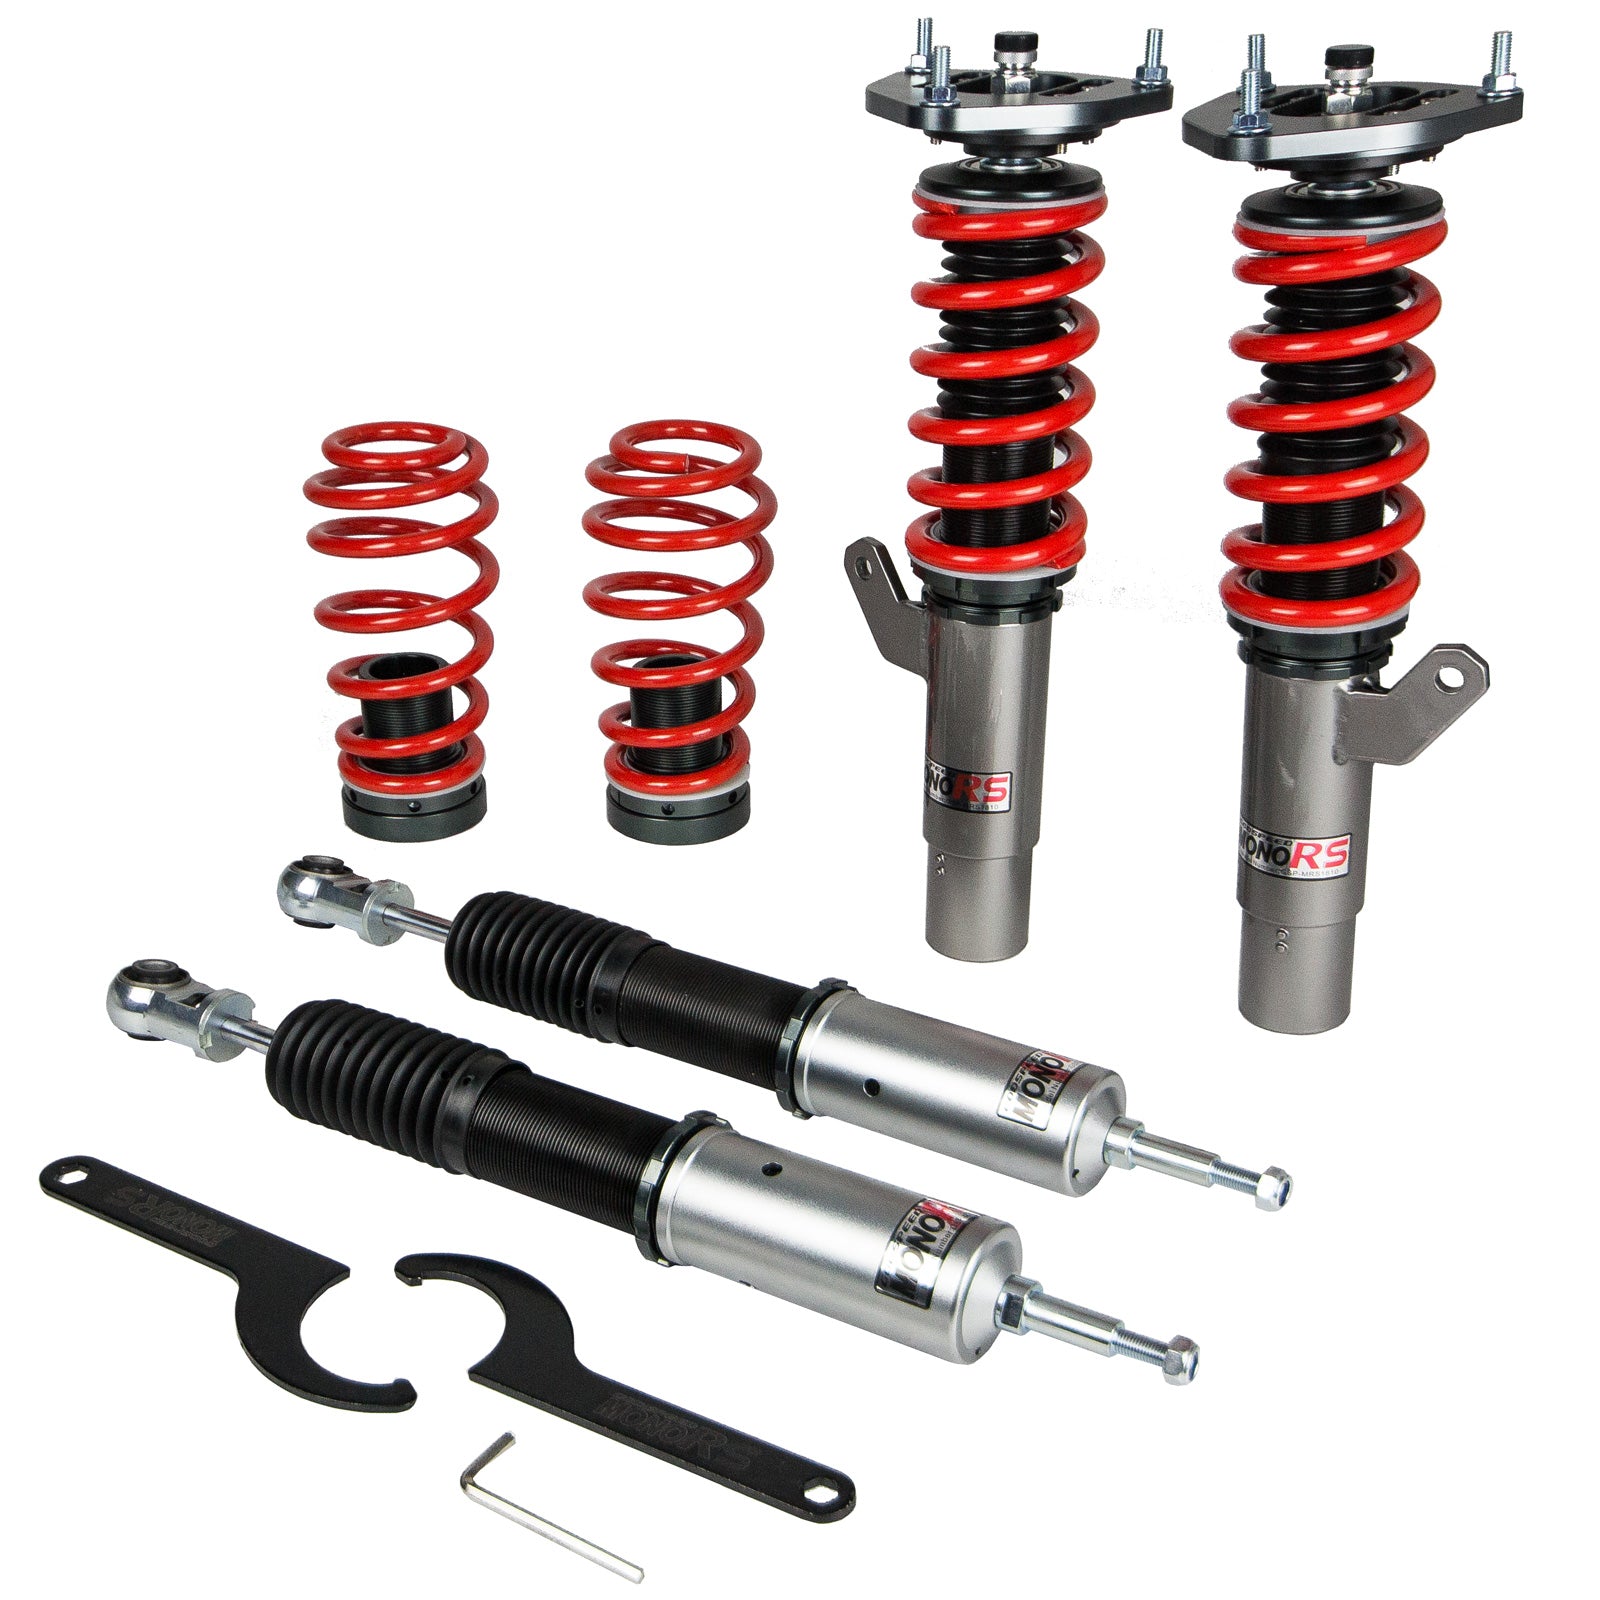 Godspeed MRS1810-D MonoRS Coilover Lowering Kit, 32 Damping Adjustment, Ride Height Adjustable